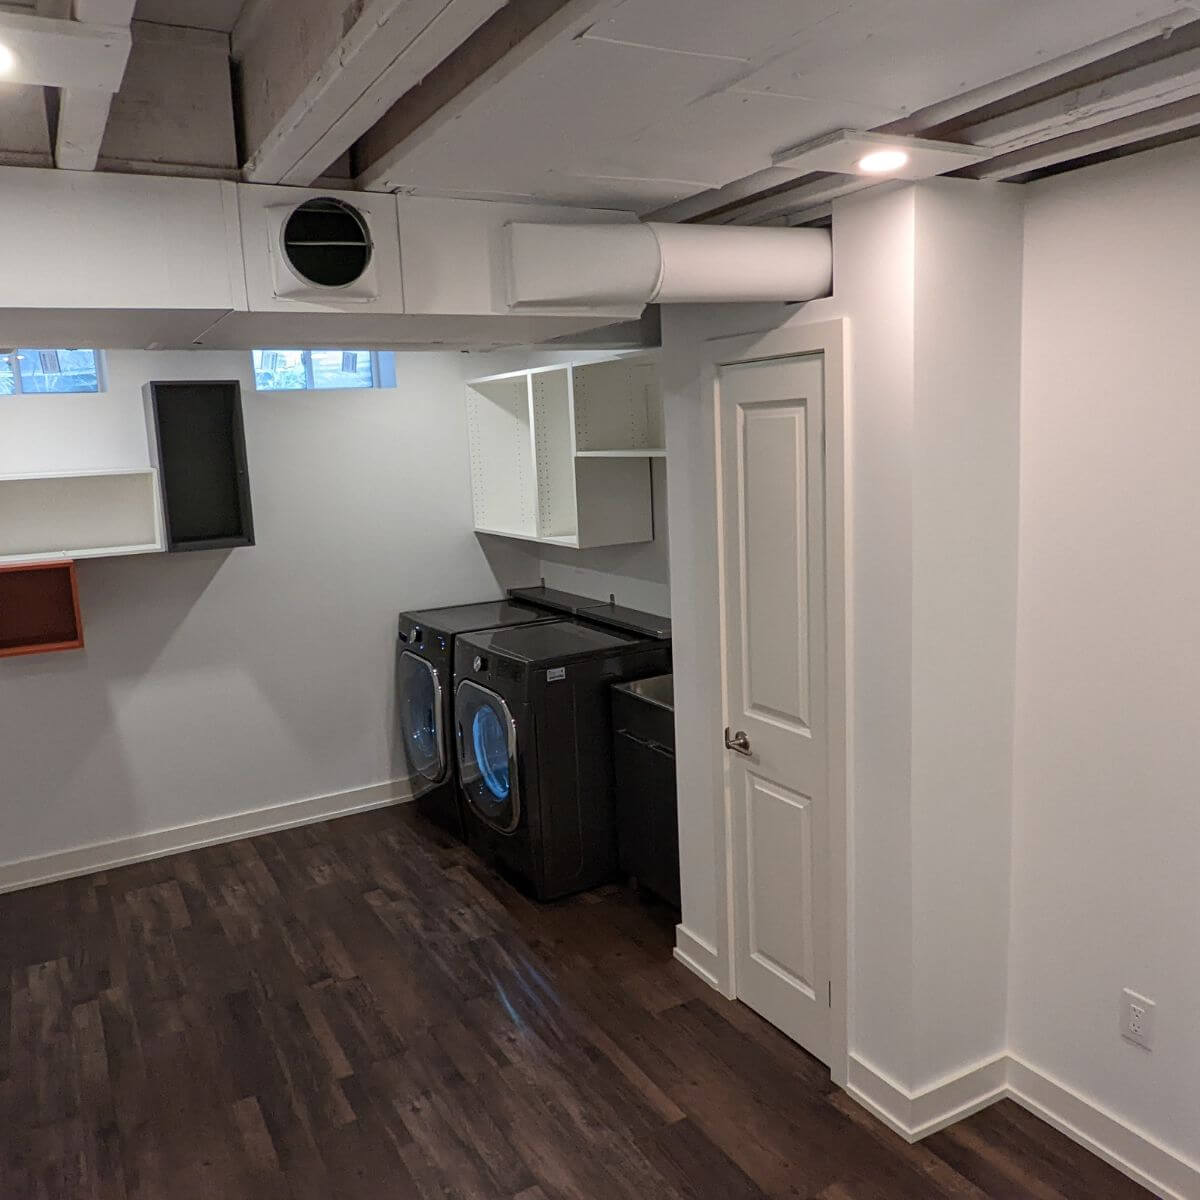 Finishing and renovating a Milton basement after